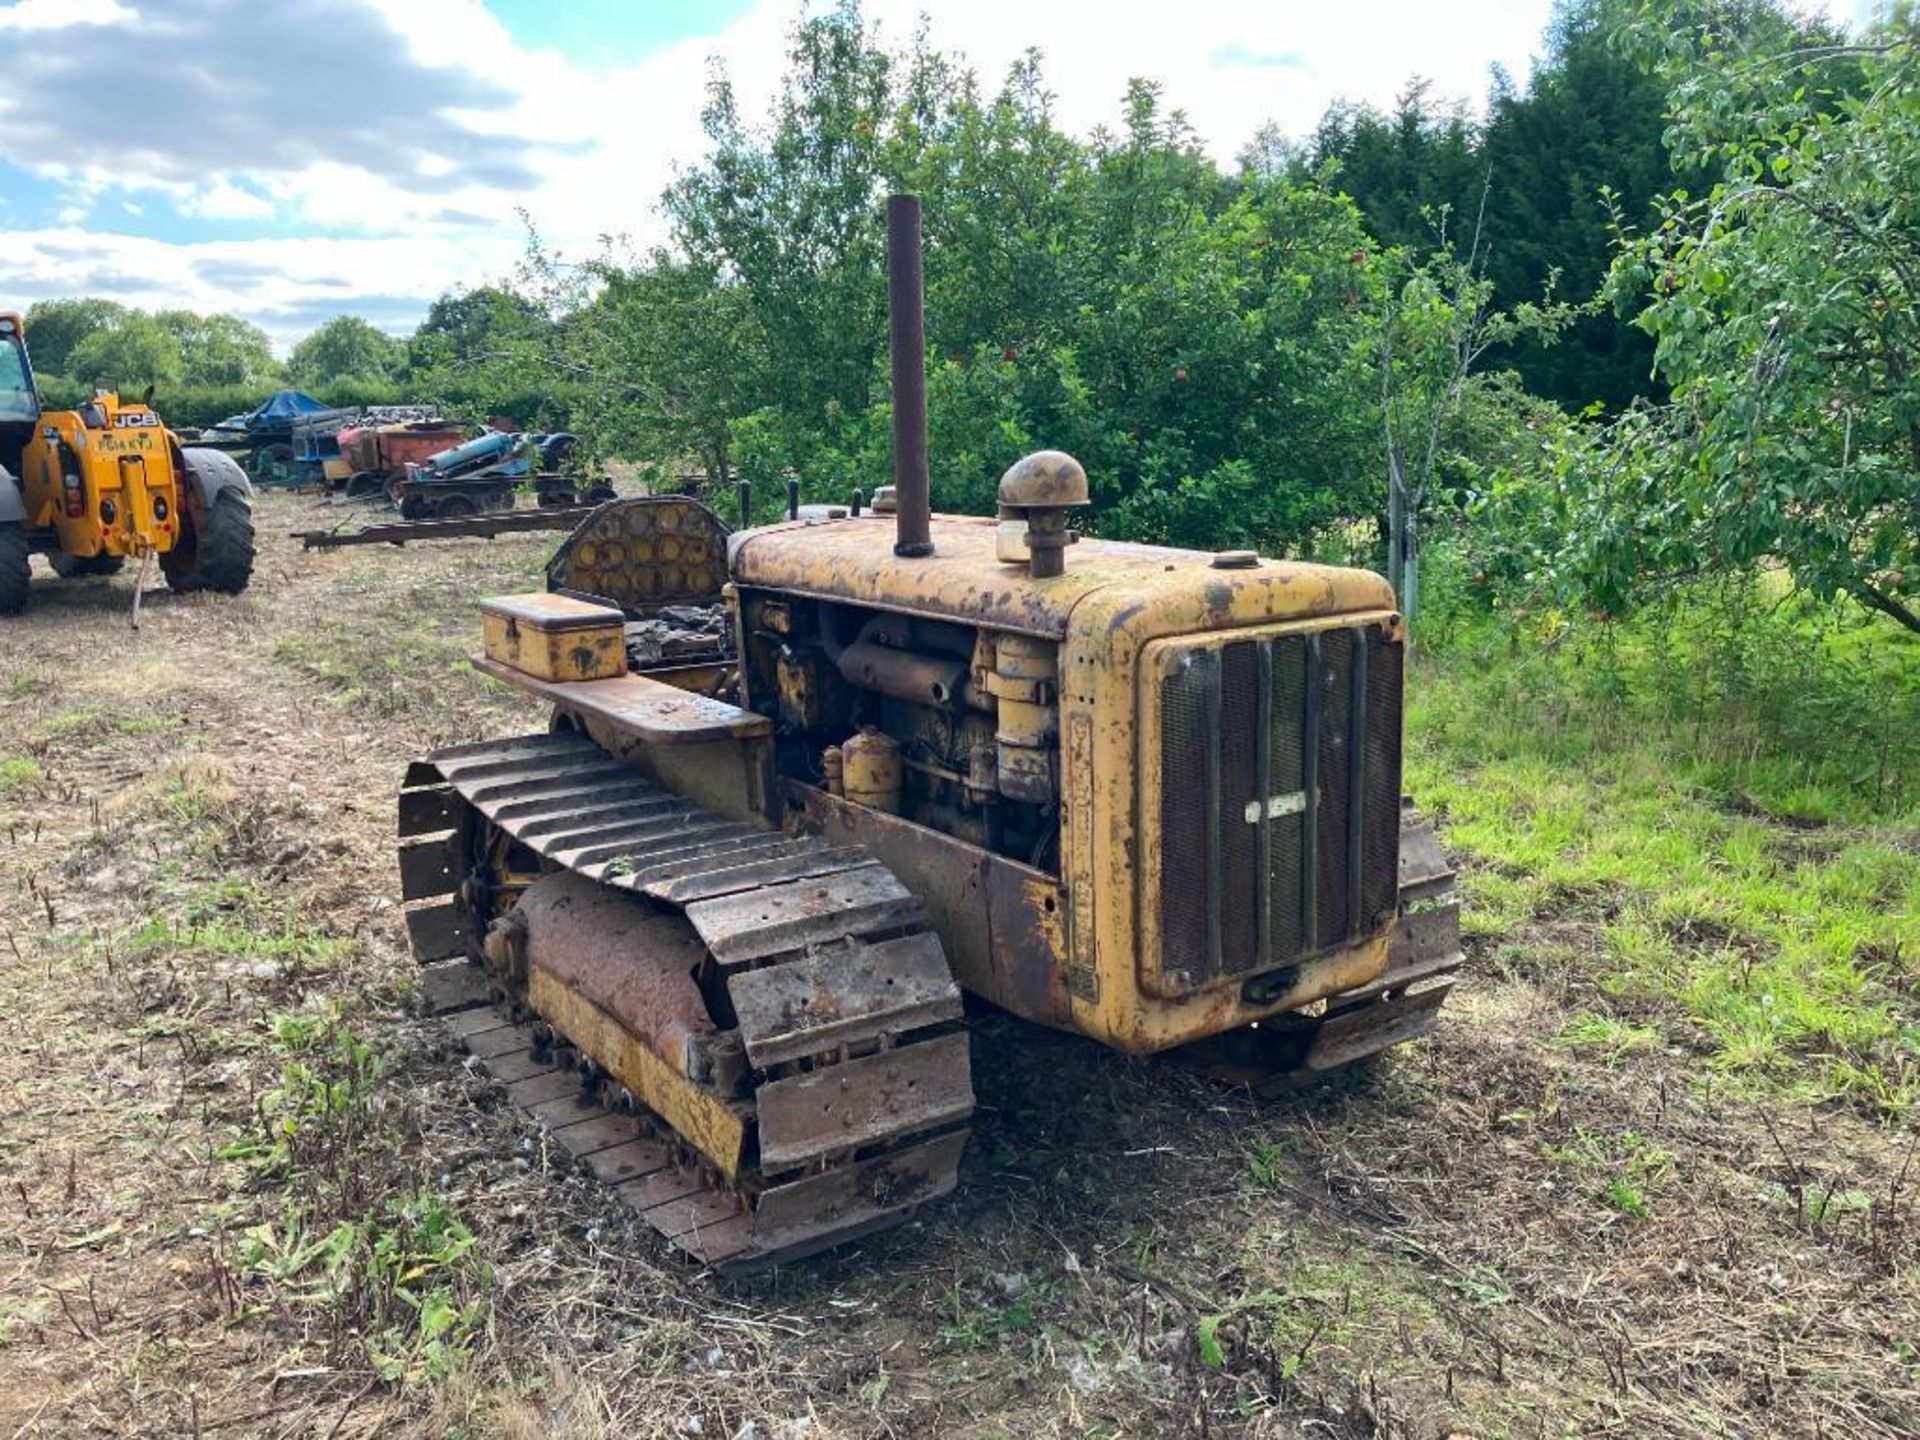 1941 Caterpillar D2 metal tracked crawler with 16" tracks, rear swinging drawbar and belt pulley. Ho - Image 4 of 15